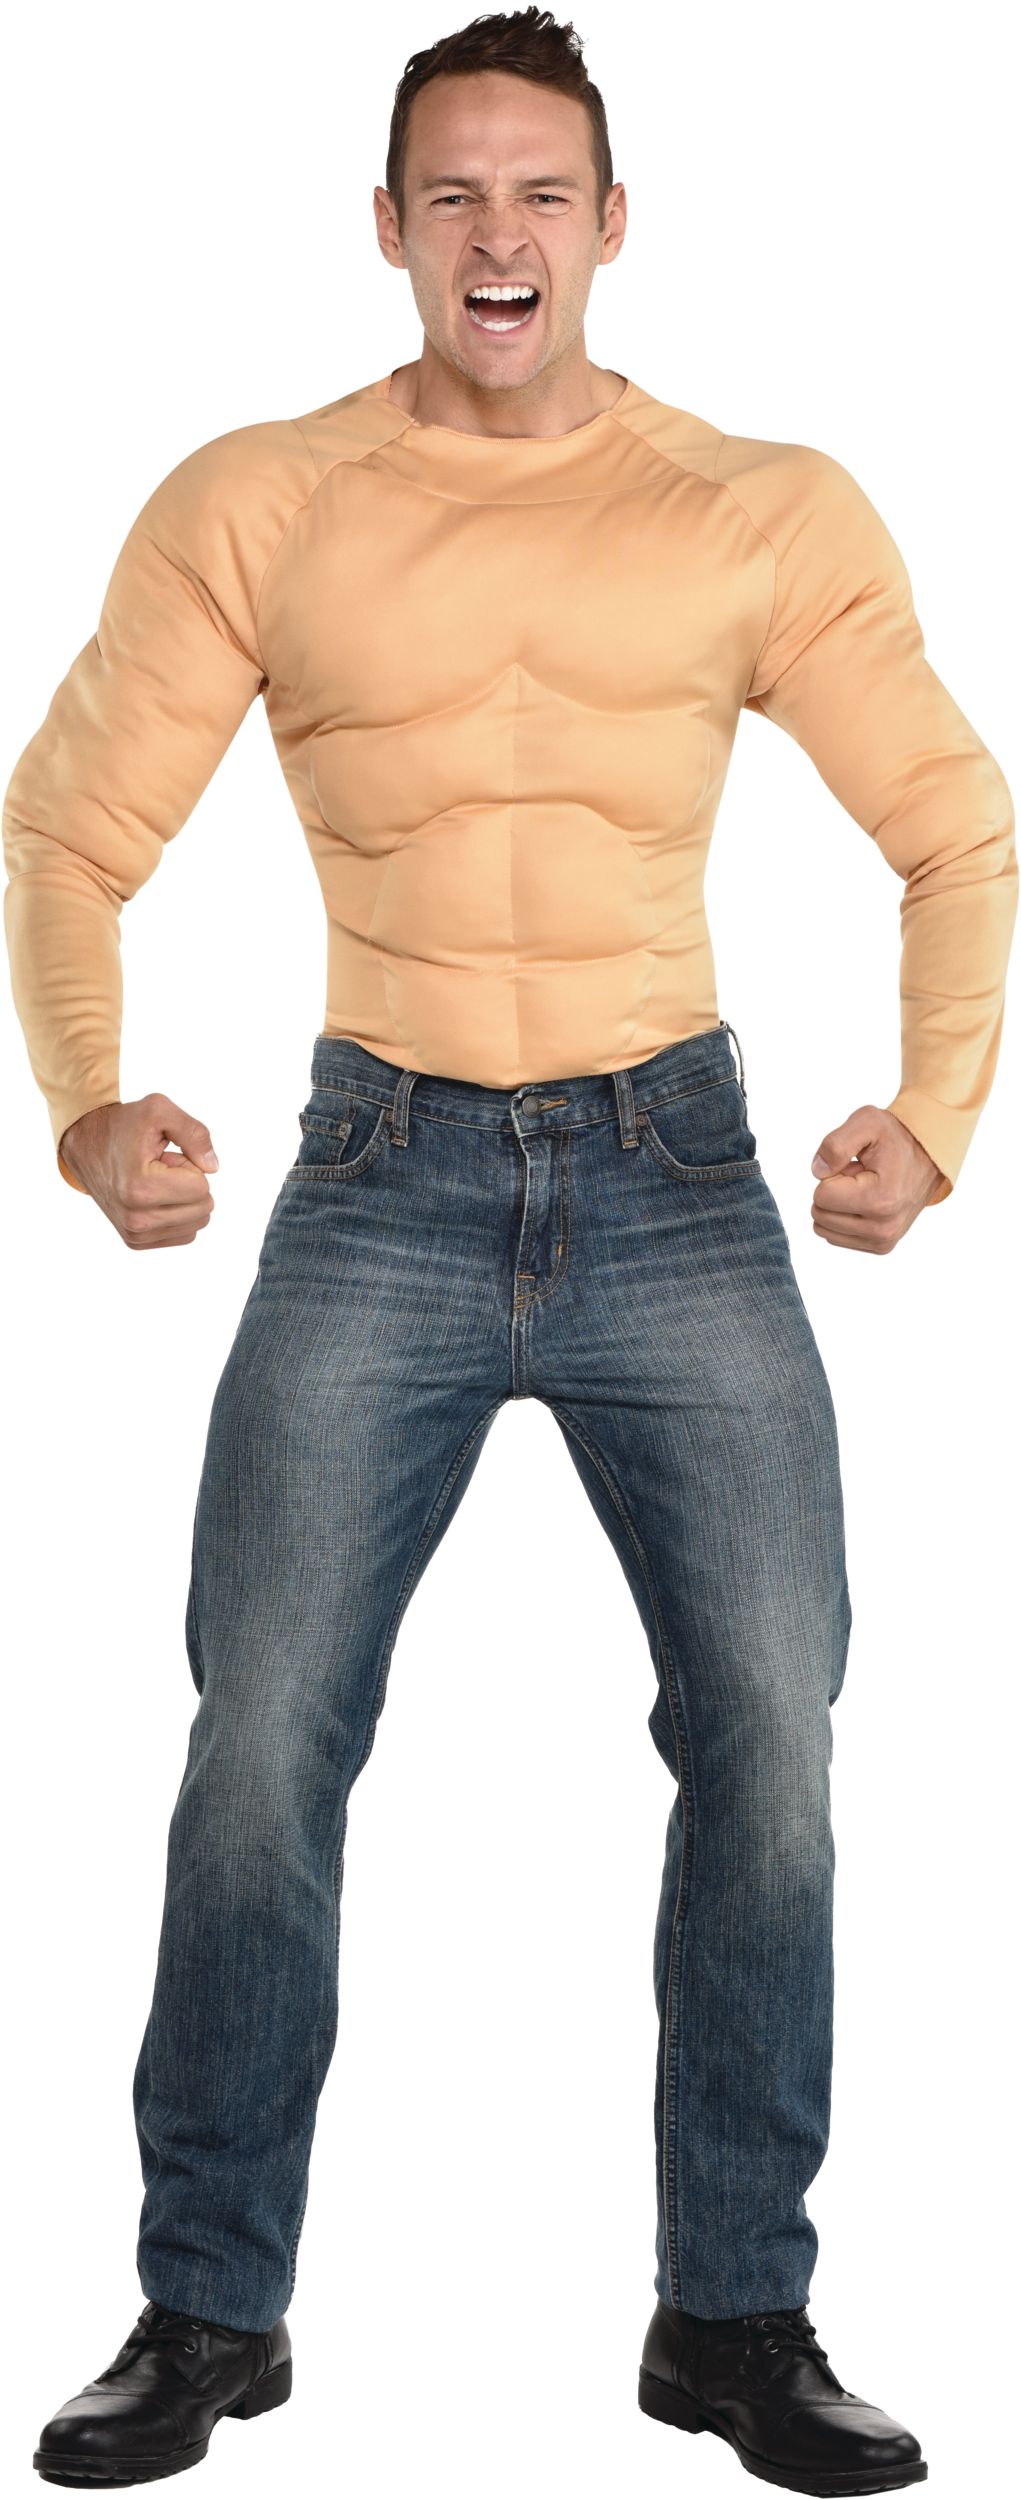 Adult Mens Fake Padded Chest Muscle Shirt Costume Muscles Bodybuilder  Accessory